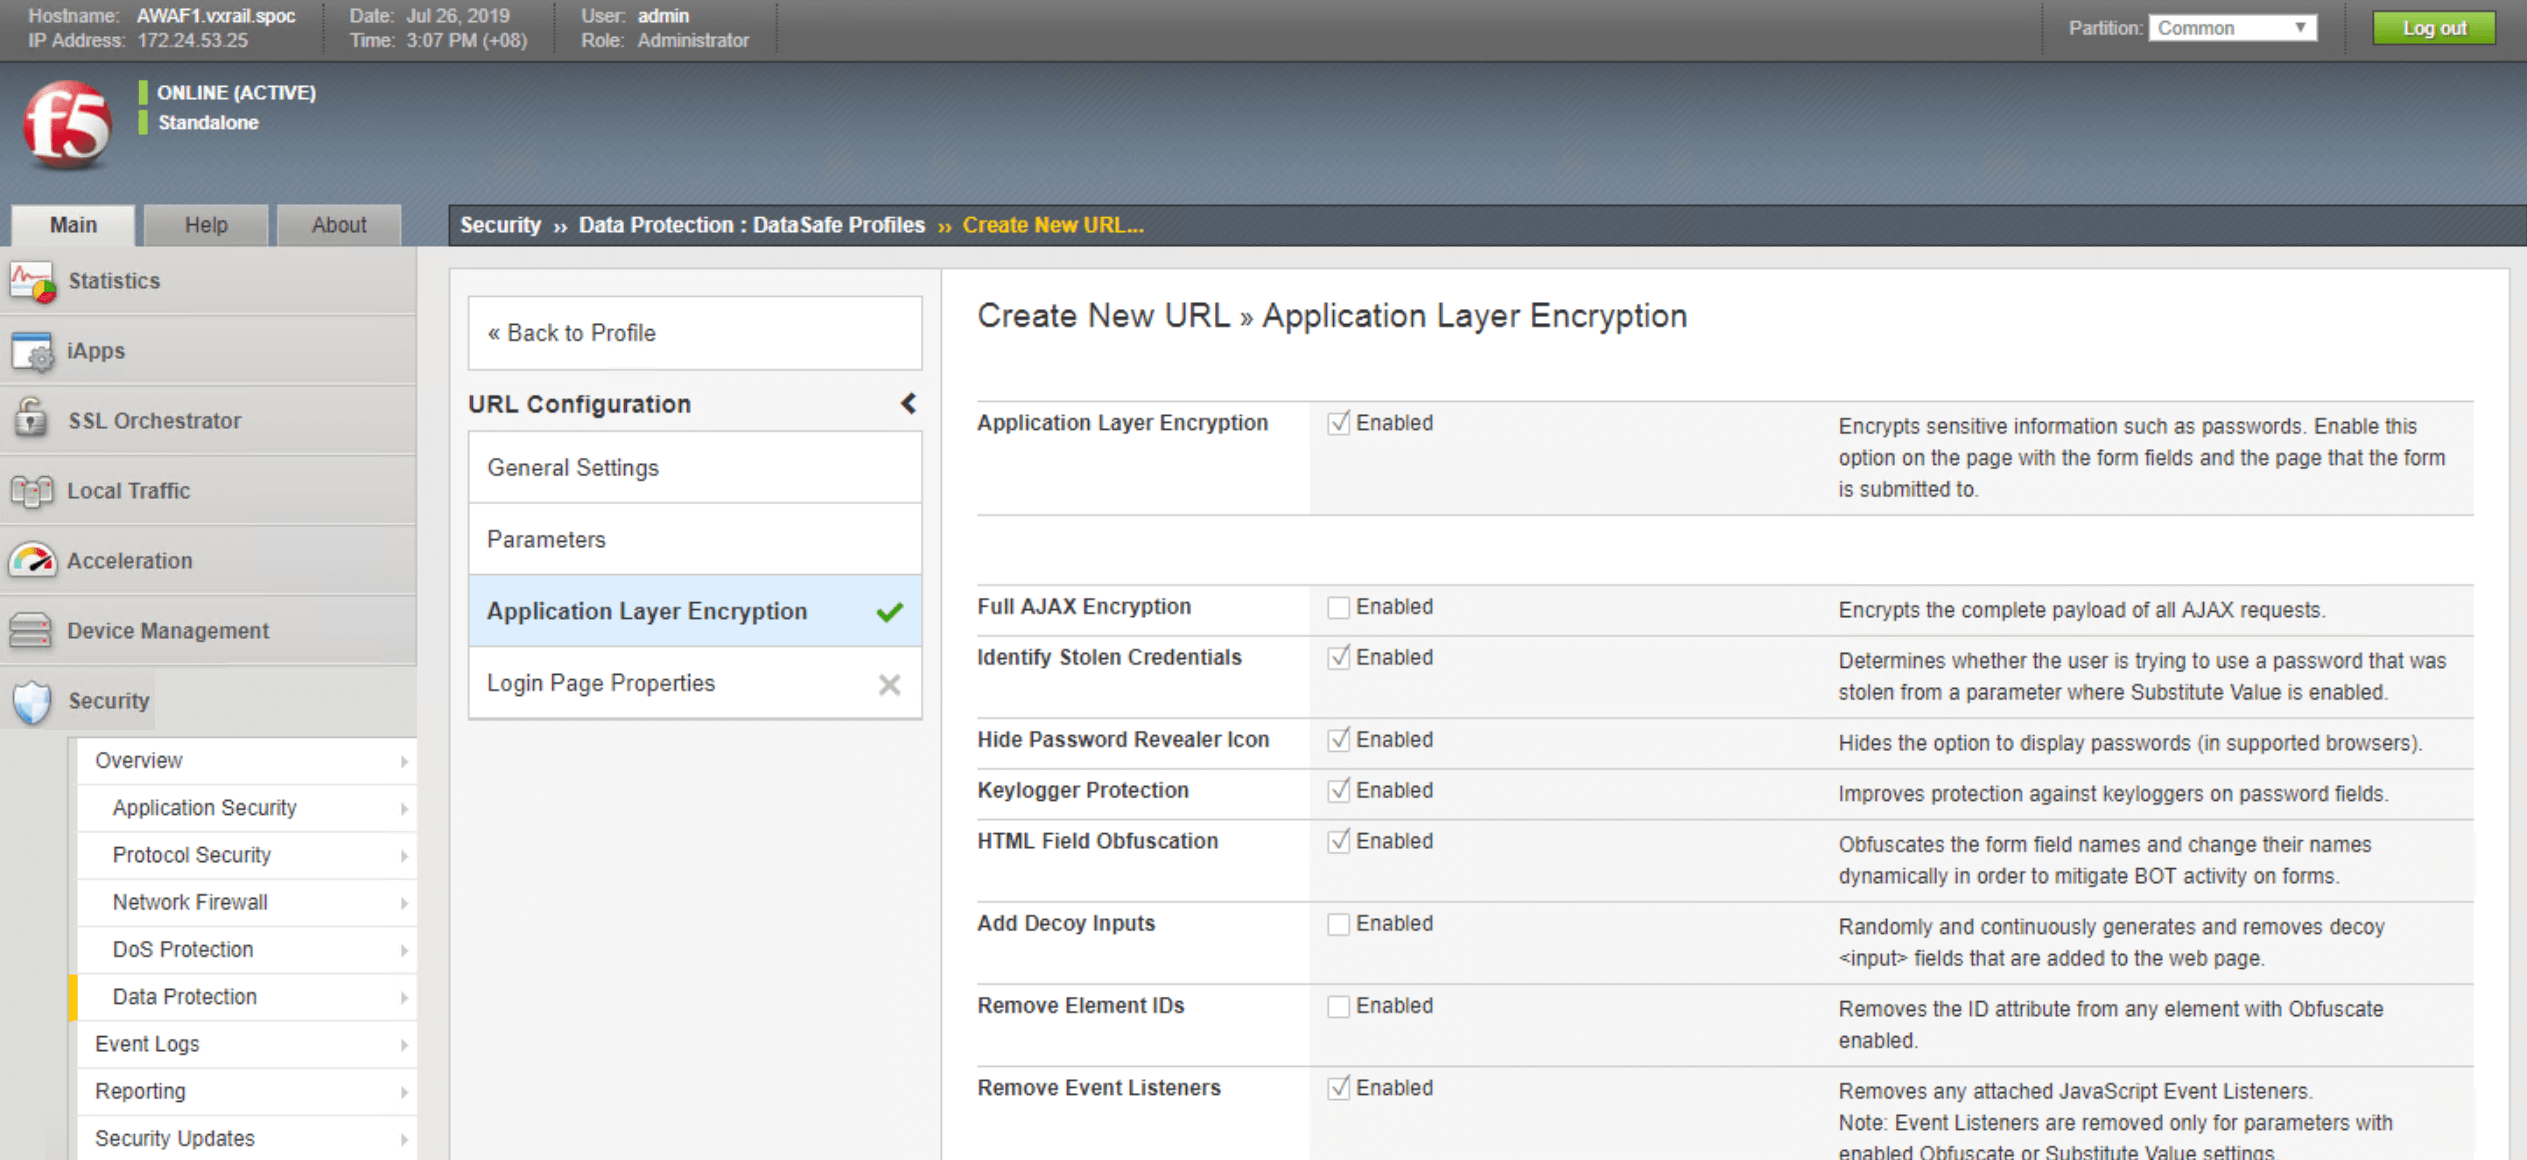 Figure 18: Choose security options in the Application Layer Encryption menu to set a security policy appropriate for your needs. 